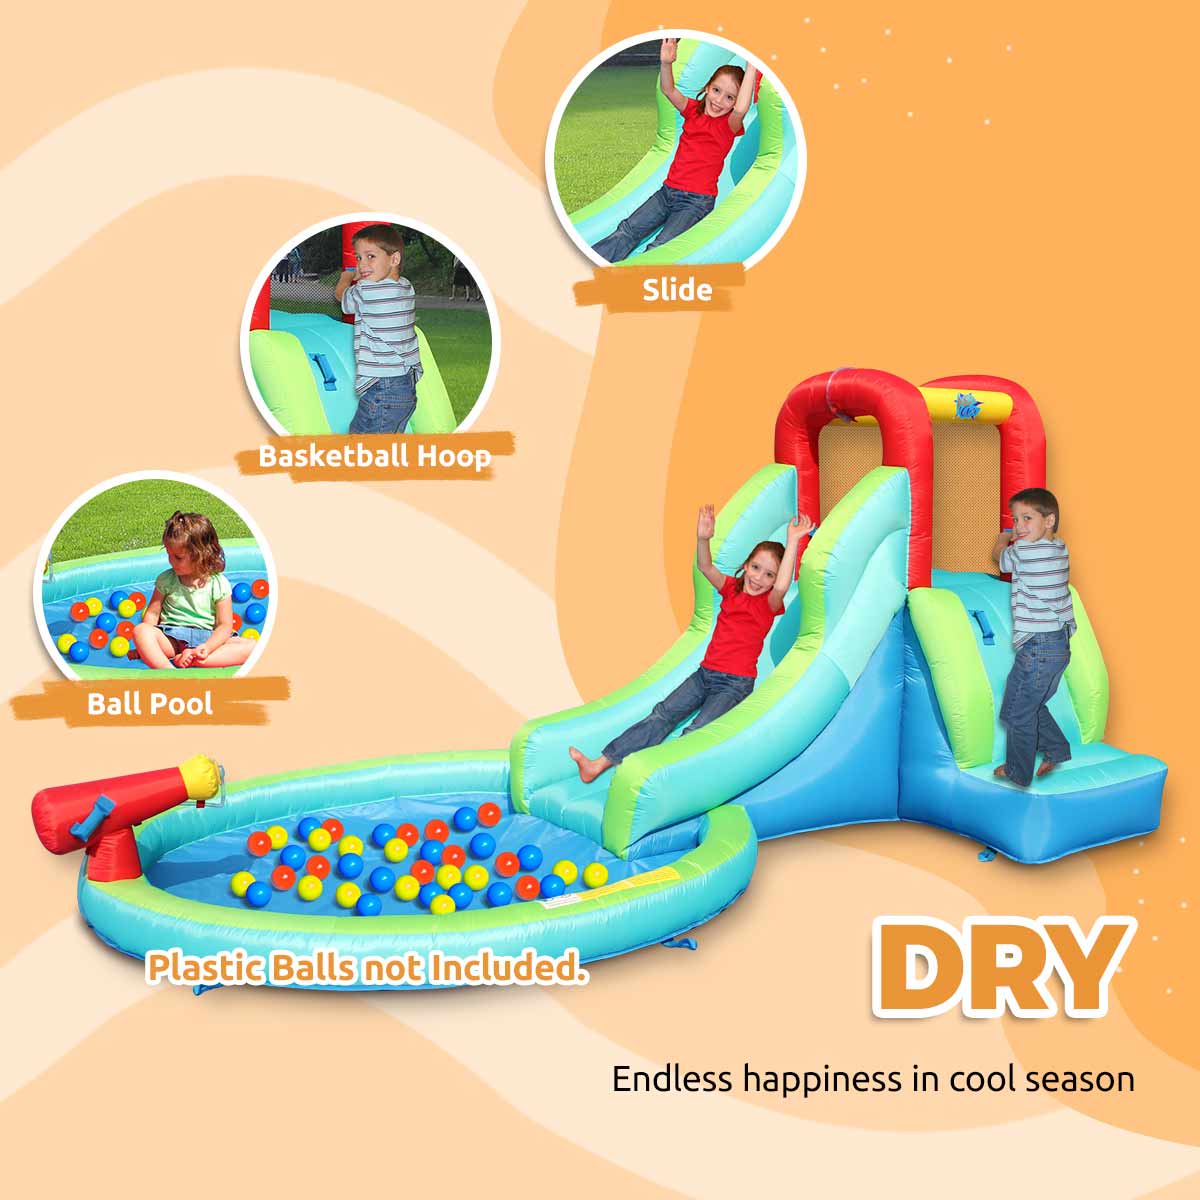 Action Air Inflatable Water Slide with Water Cannon & Splash Pool